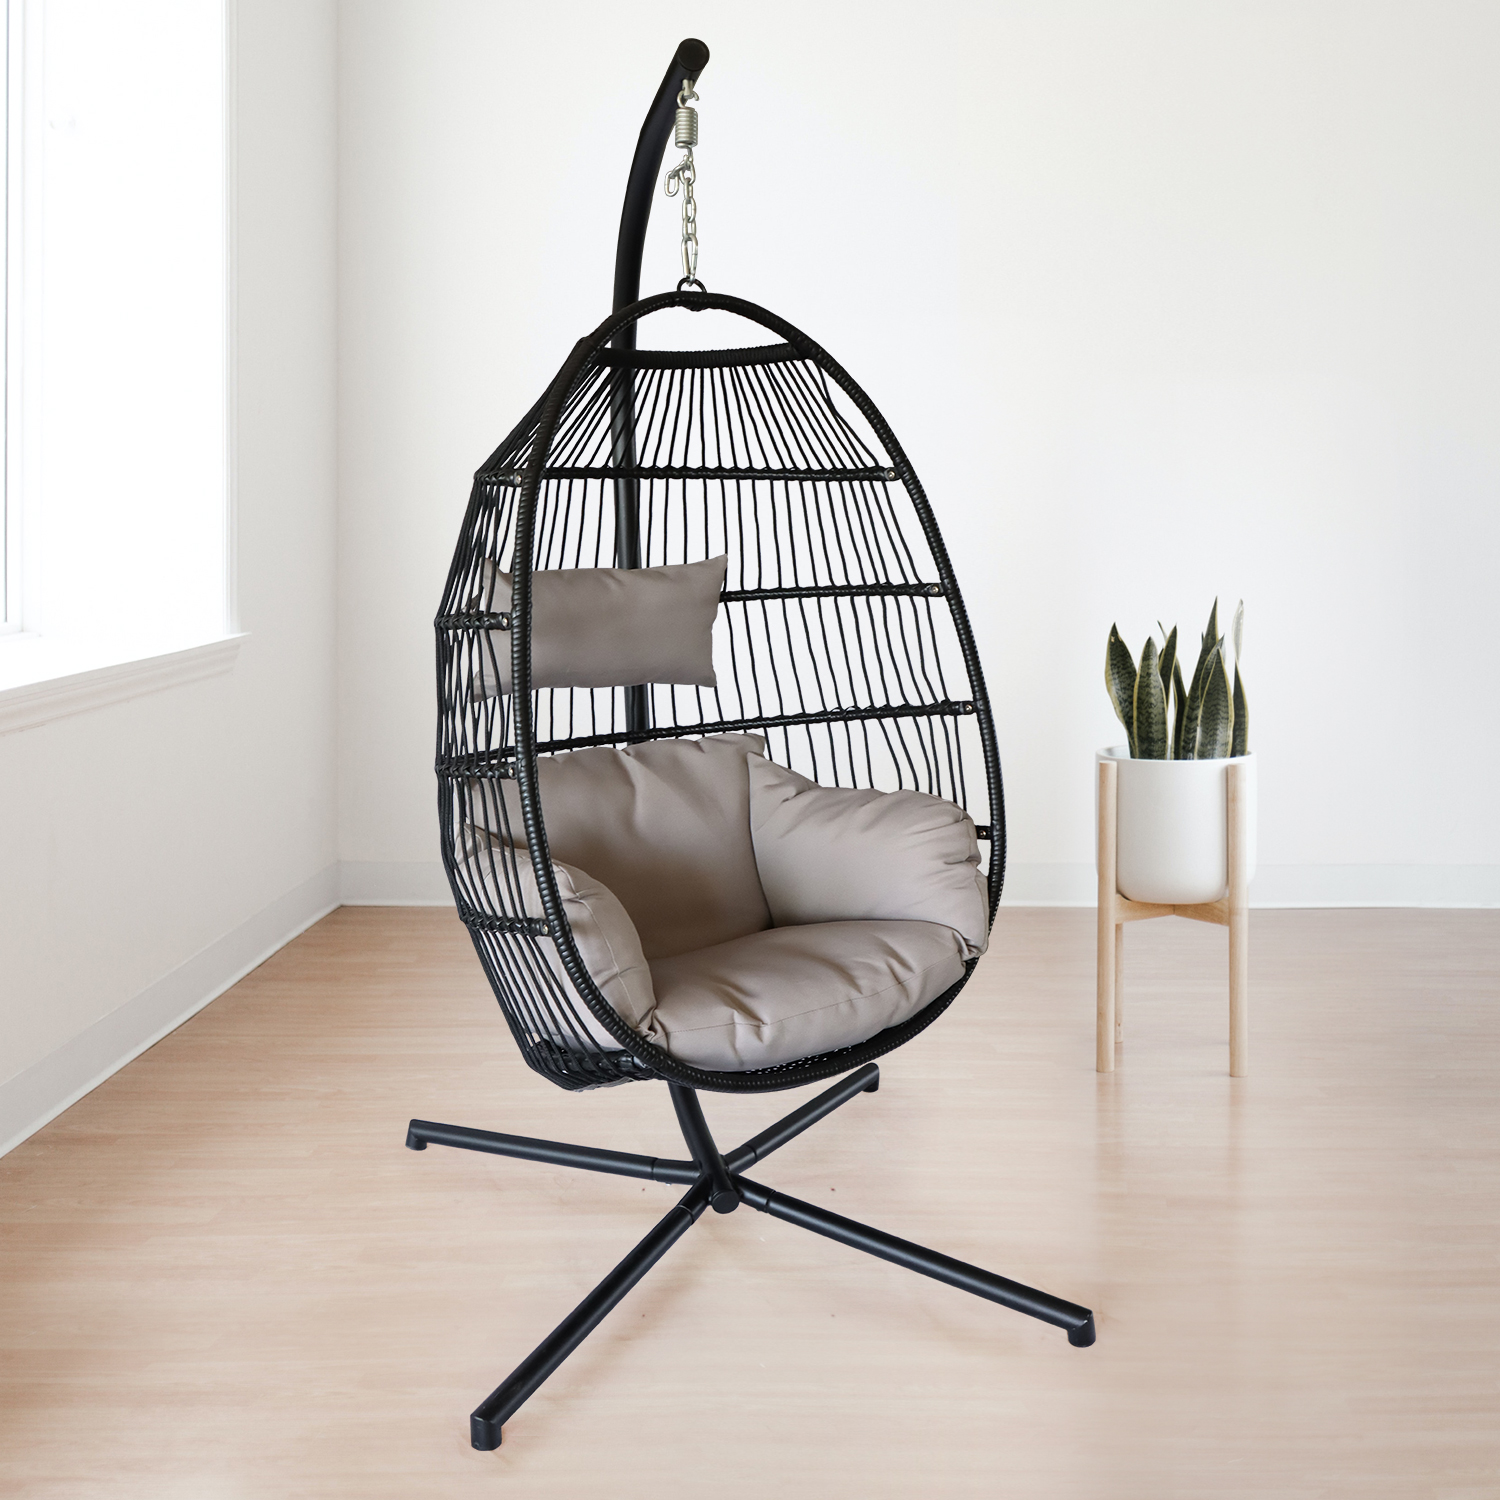 Hanging Egg Chair with Stand Outdoor Patio Swing Egg Chair Indoor Folding Egg Chair, Waterproof Cushion, Folding Rope Back, Heavy Duty C-Stand, 330LBS Capacity-CASAINC